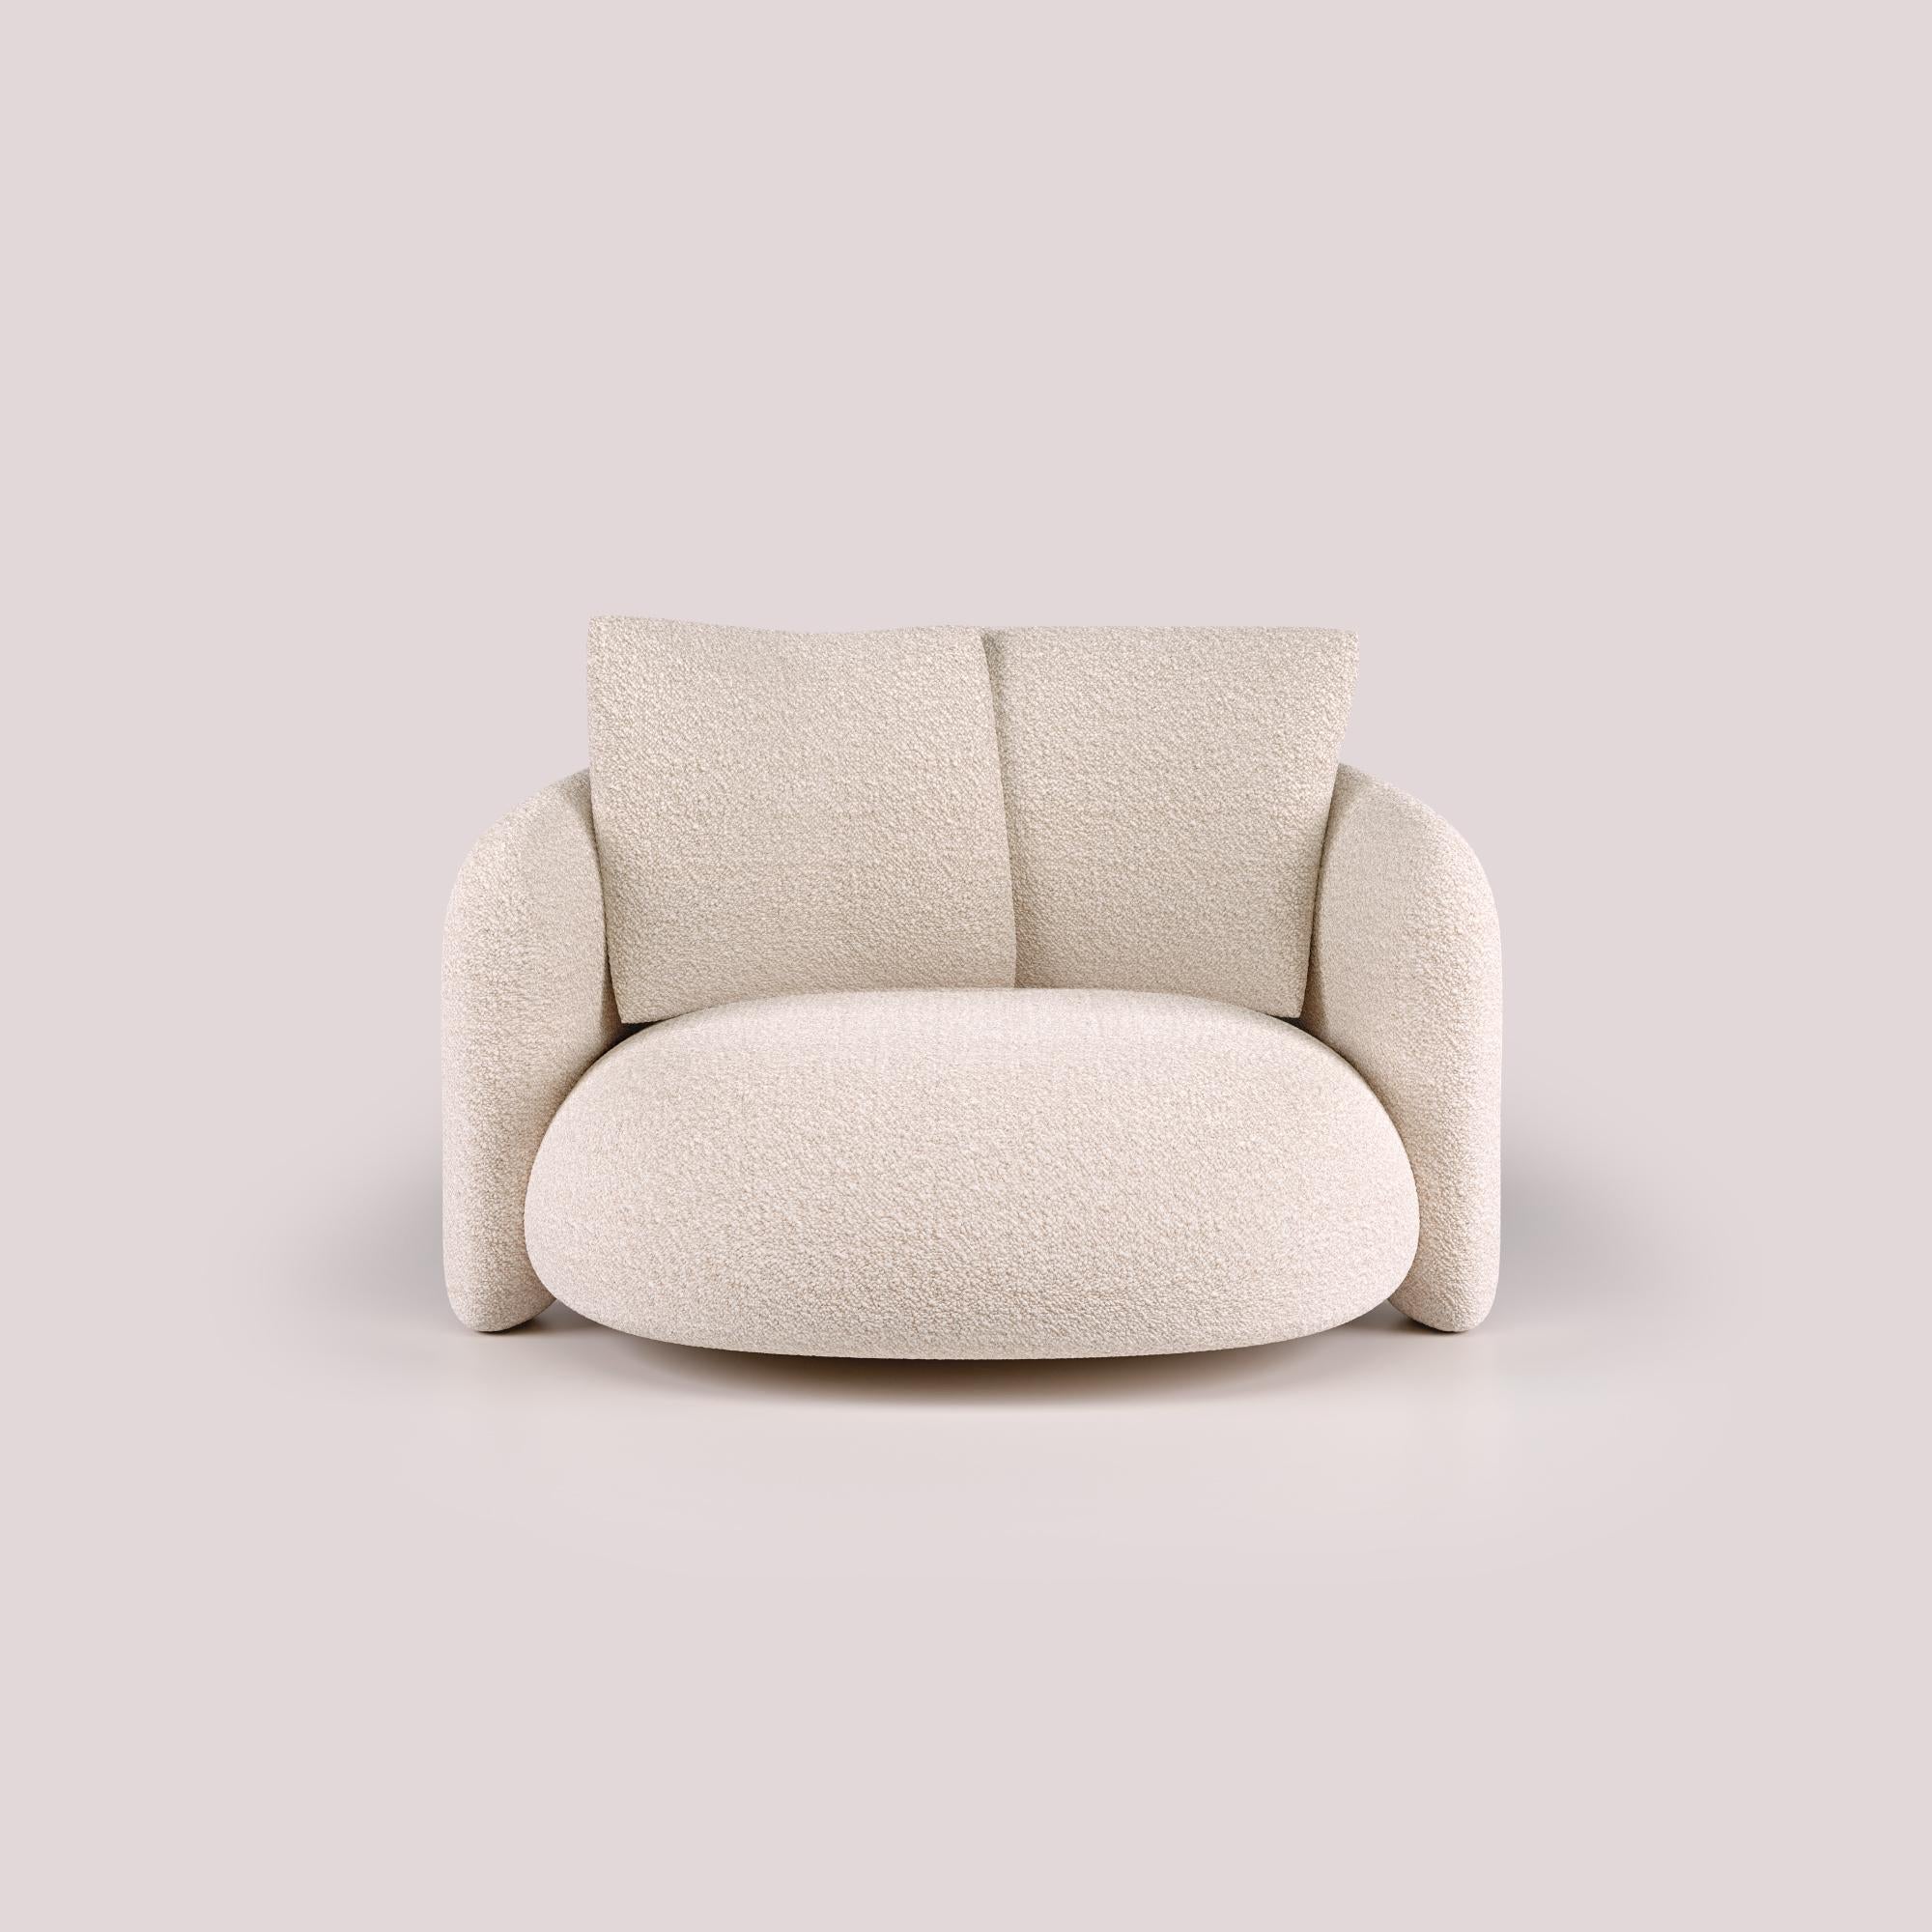 Expressing modern design excellence, the Bold Love Seat is a testament to the artistry of luxury living. Decades of design expertise are showcased through an elegant and refined aesthetic. Its inviting design features a clean, sleek silhouette that